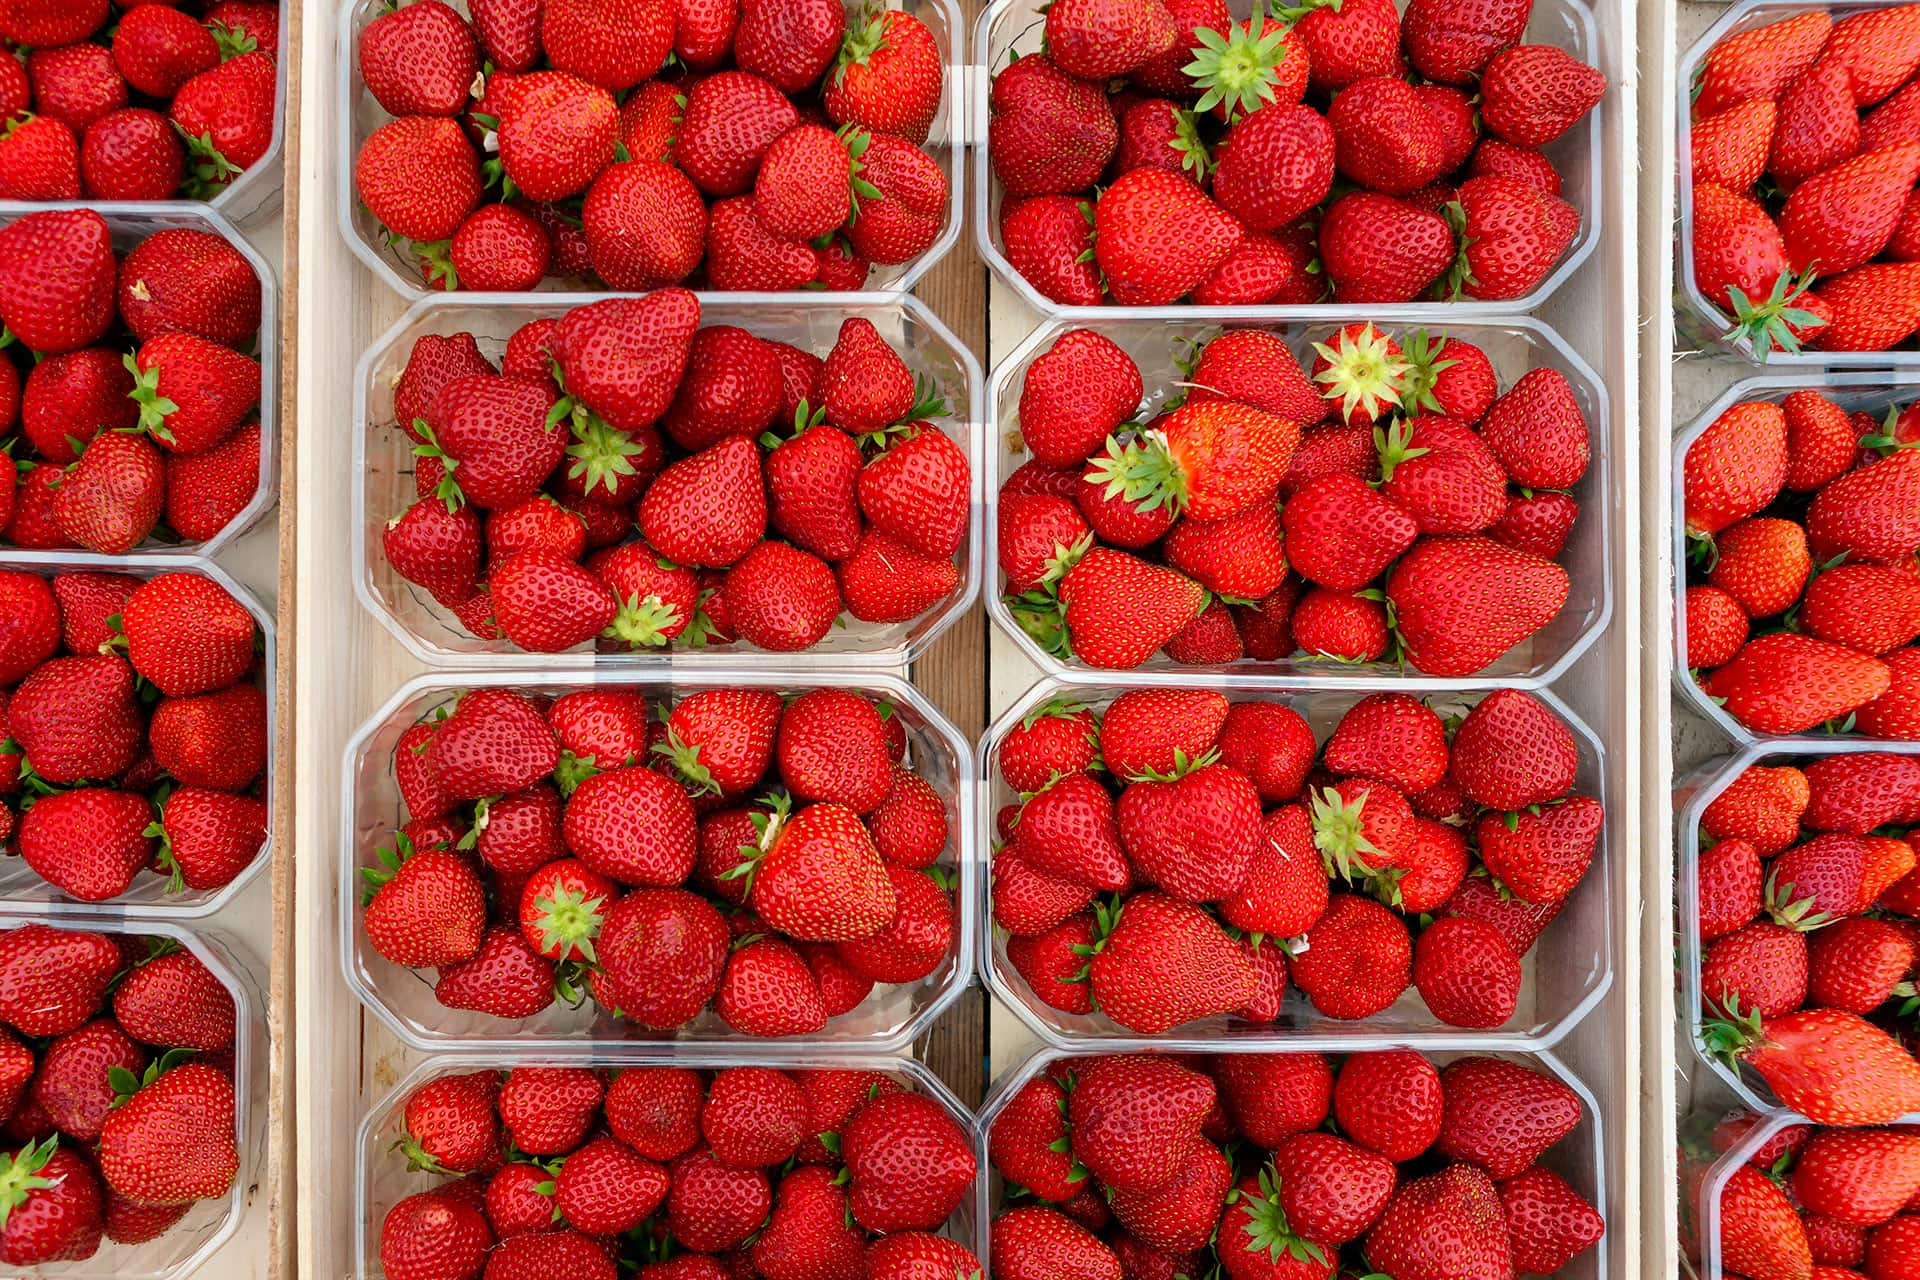 Overhead photo of several boxes of red strawberries